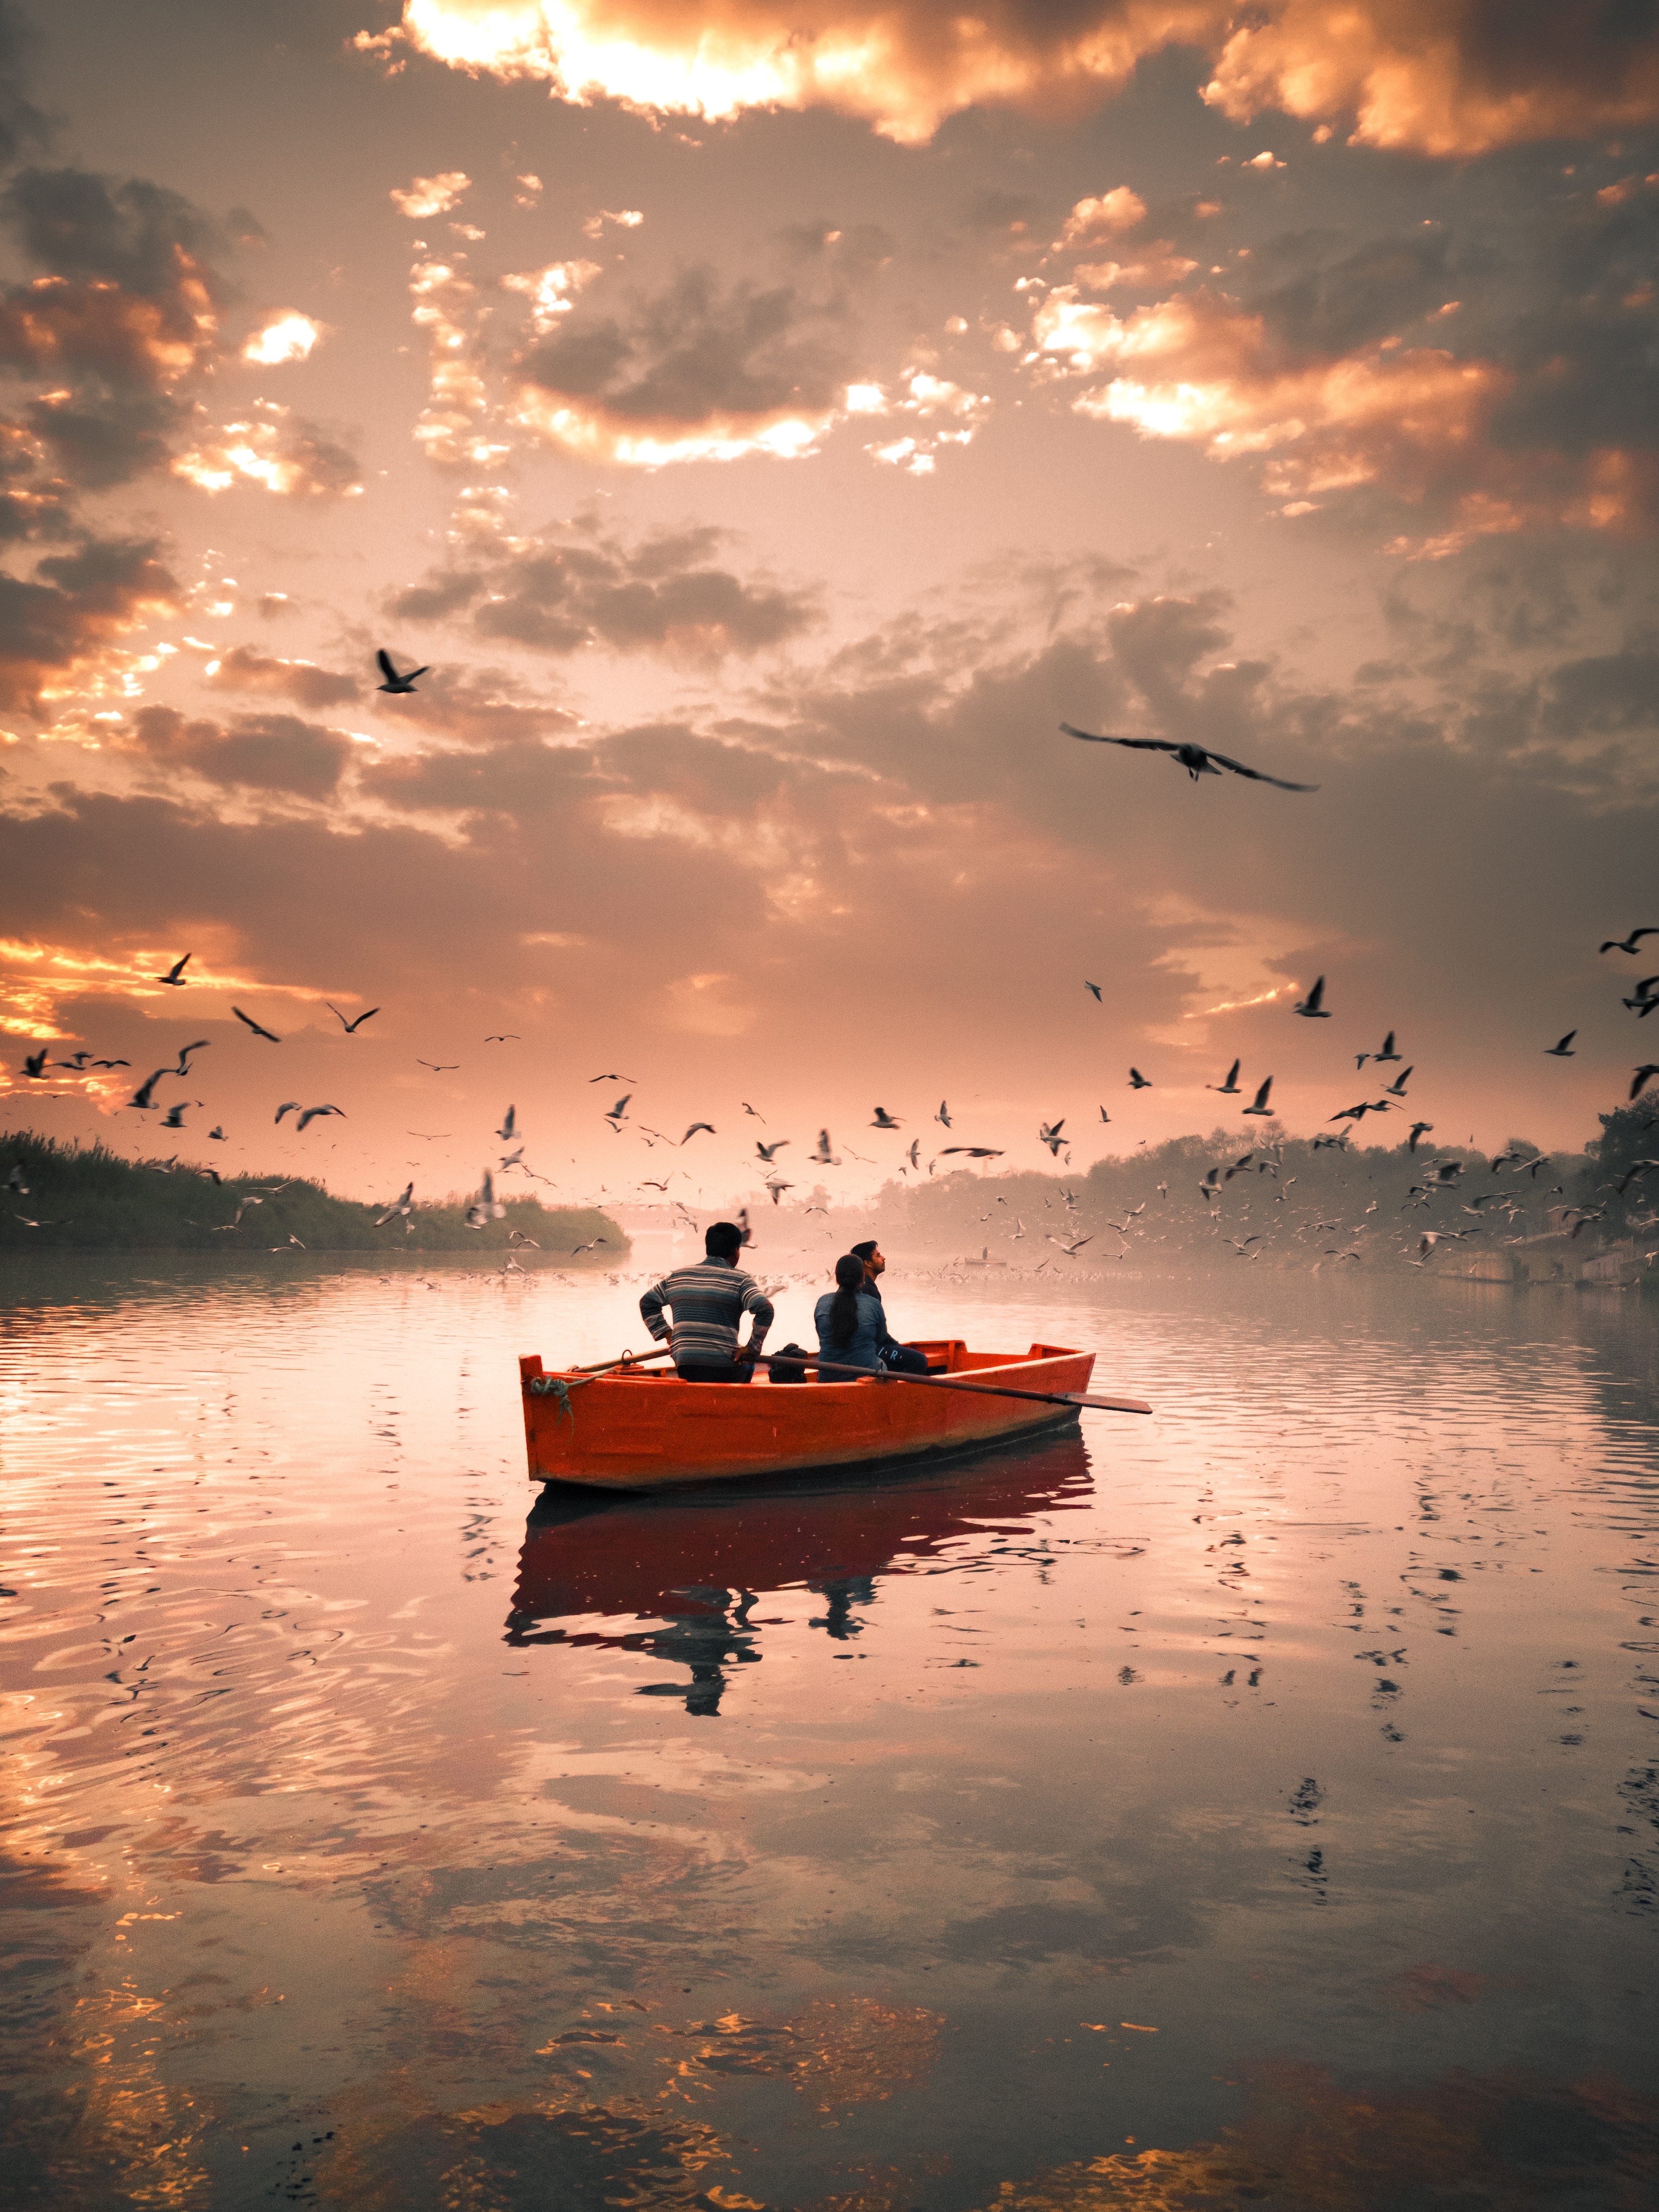 stroll, birds, nature, rivers, sky, seagulls, clouds, boat UHD